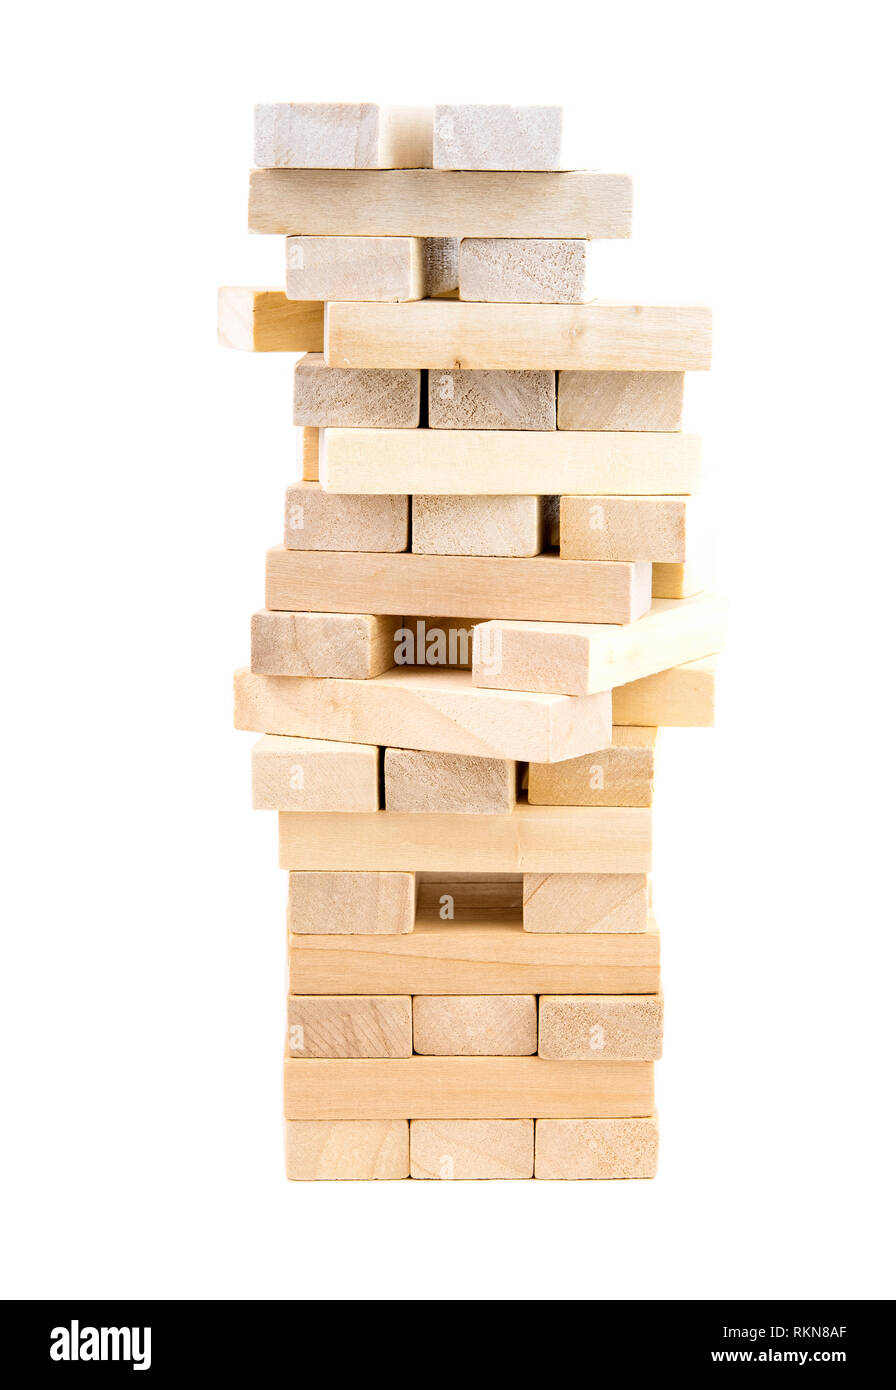 Wooden tower blocks game, toy for planning and practicing meditation, on white background, isolated Stock Photo